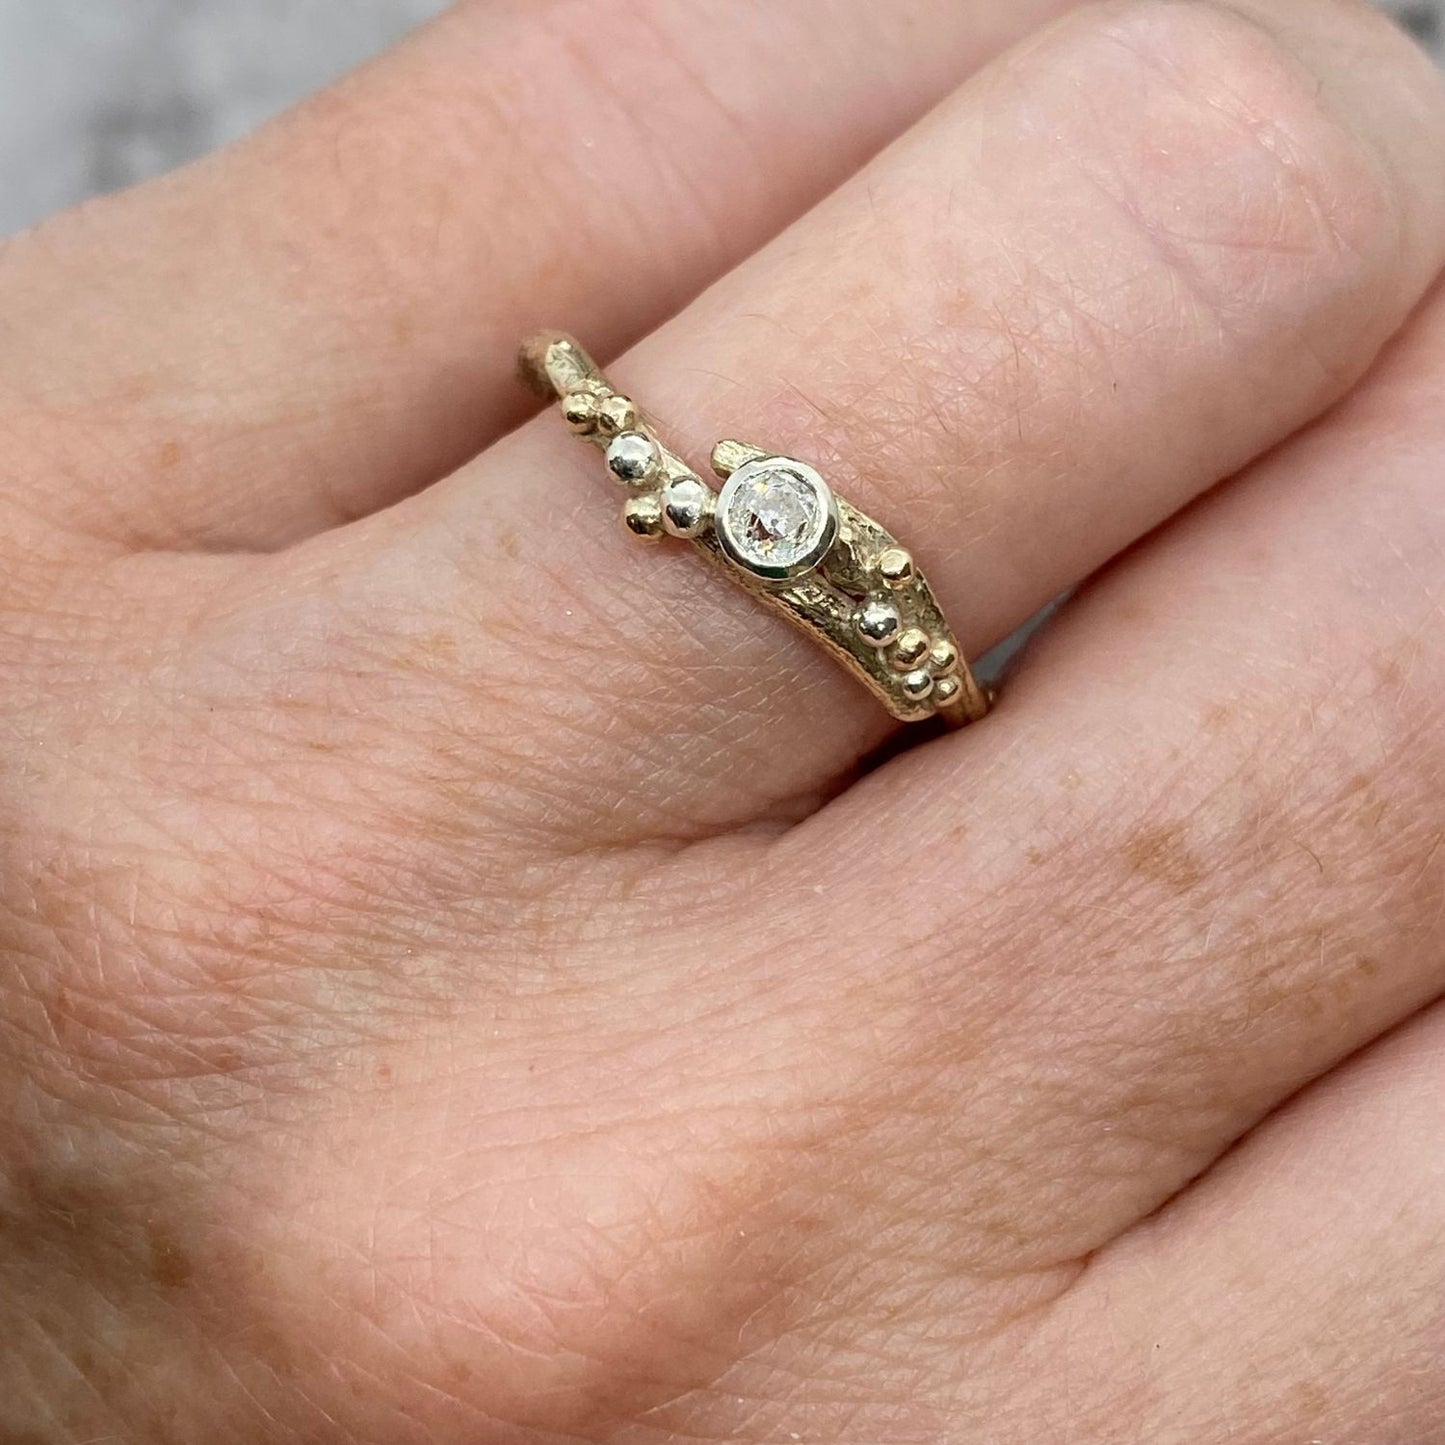 Recycled Vintage Diamond Twig Ring, Unique Eco Gold Engagement Ring